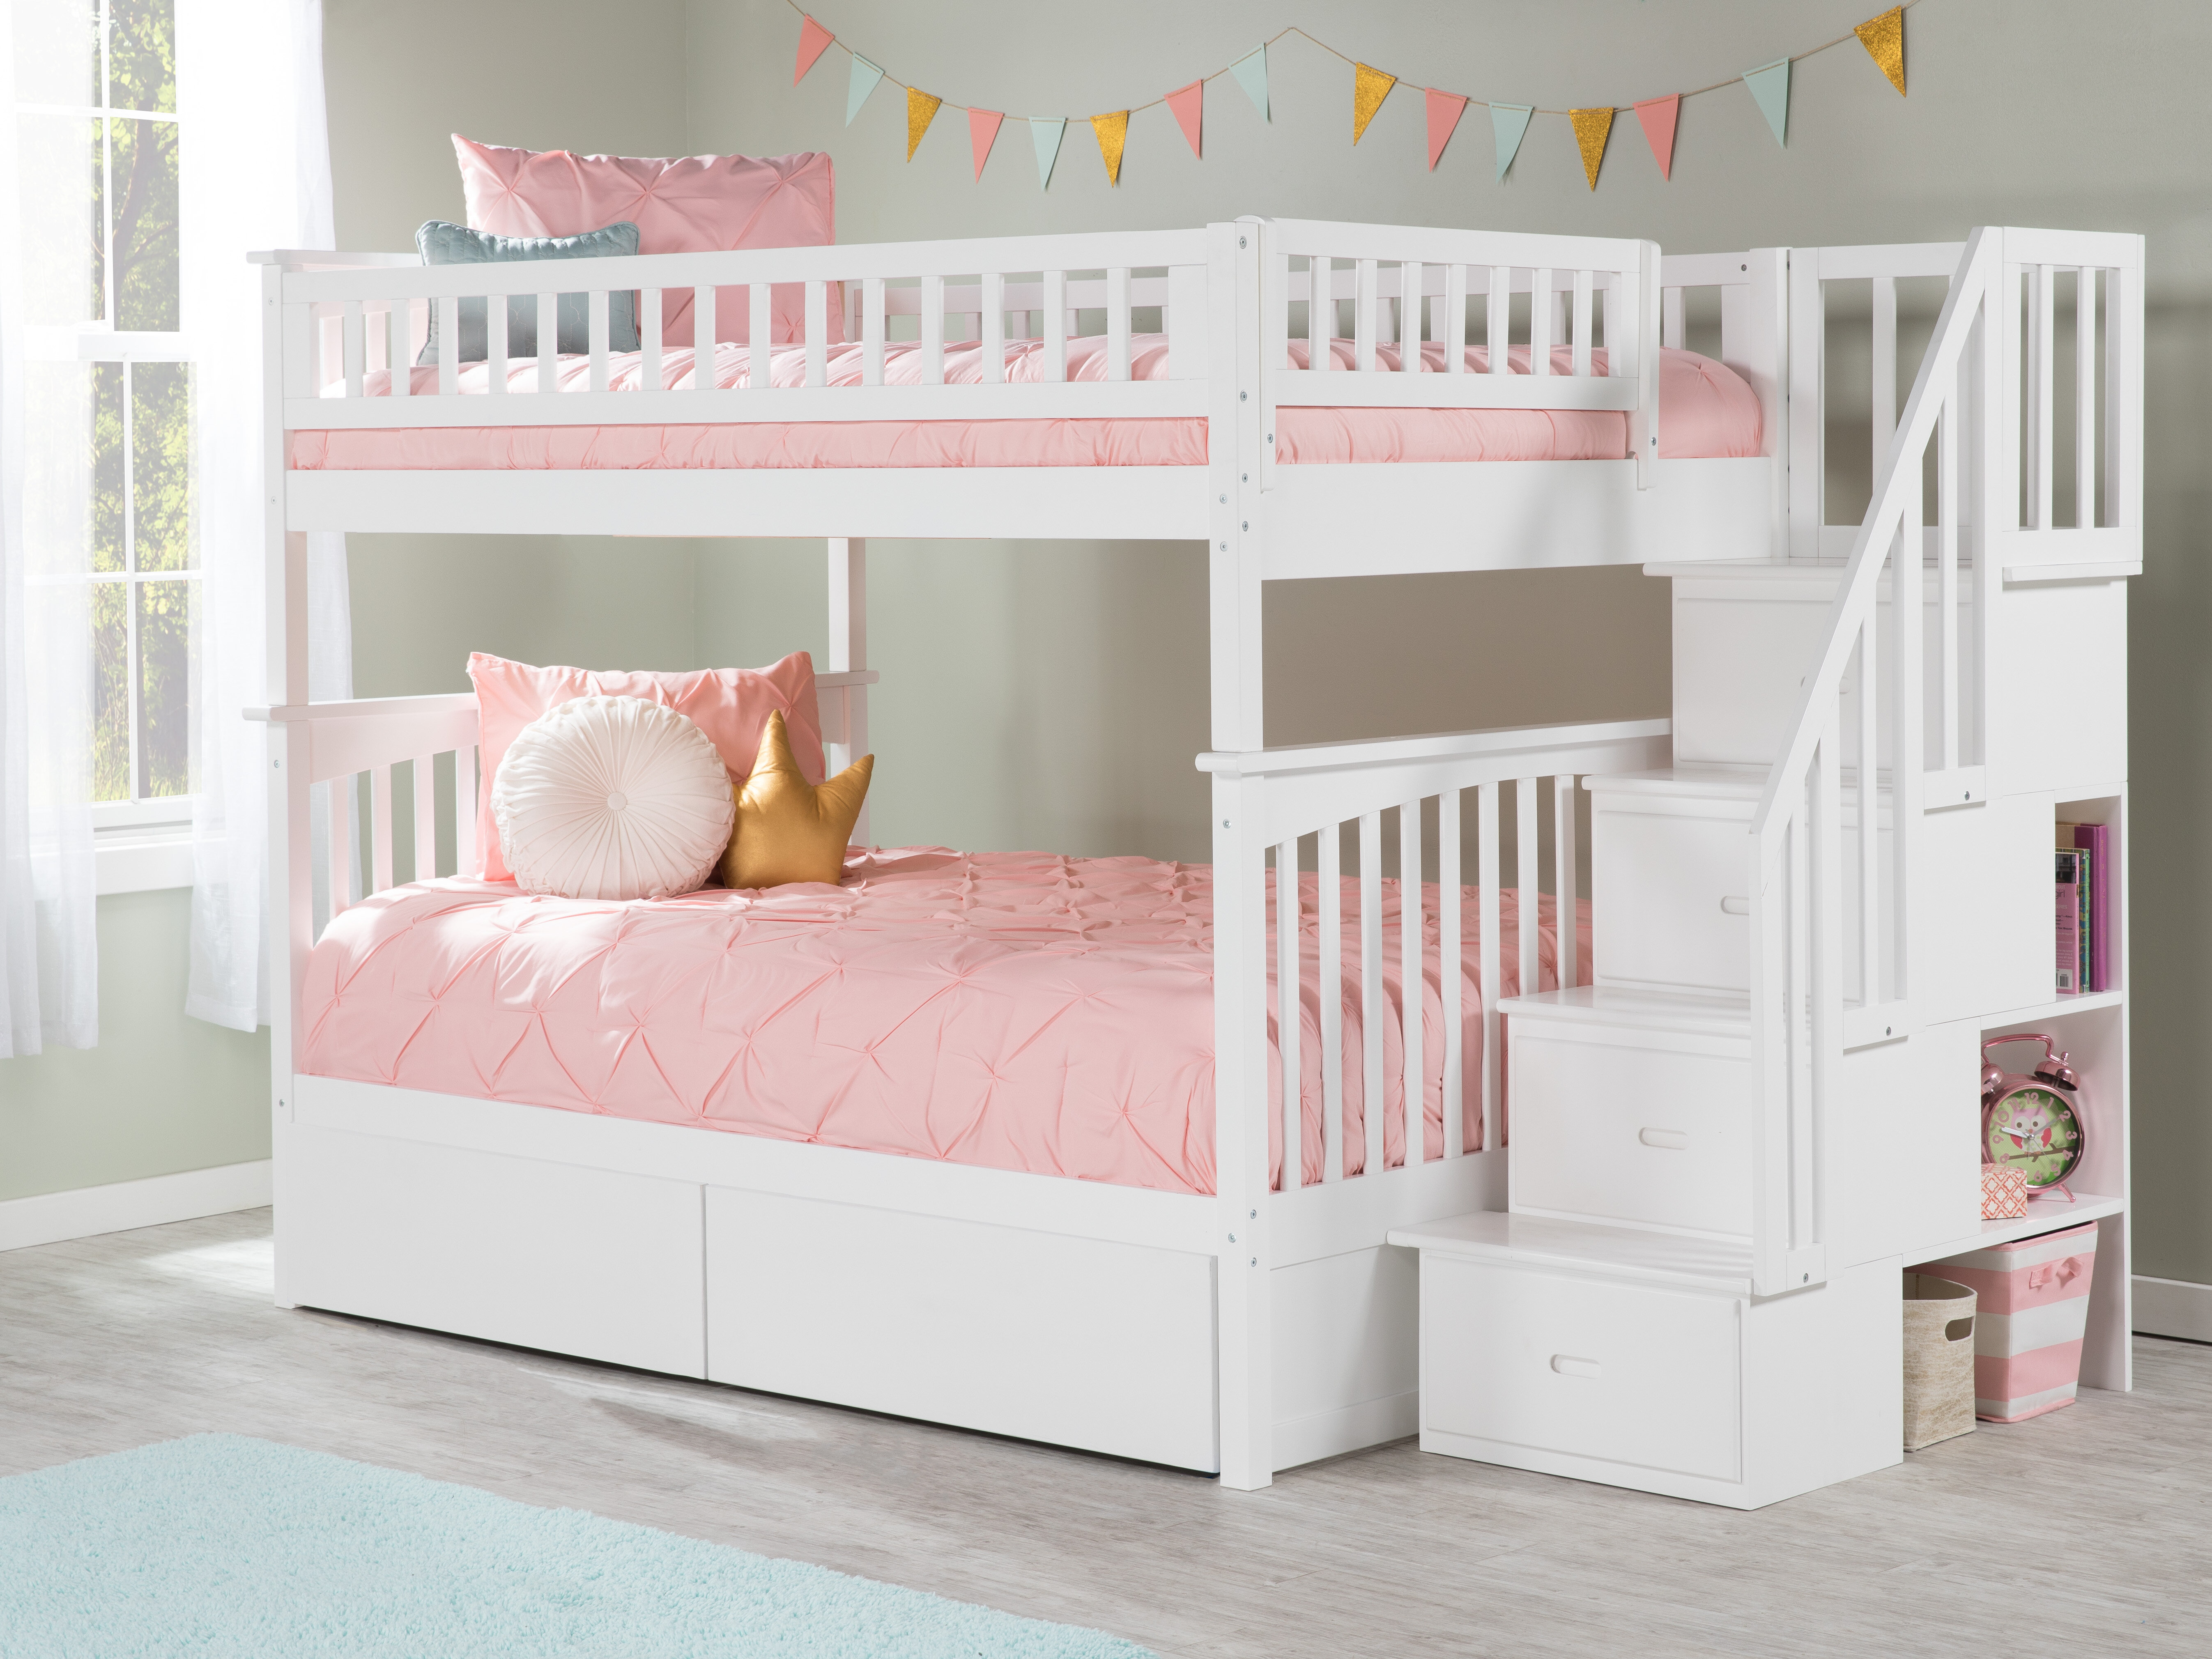 Wayfair Bunk With Stairs Kids Beds You Ll Love In 2021